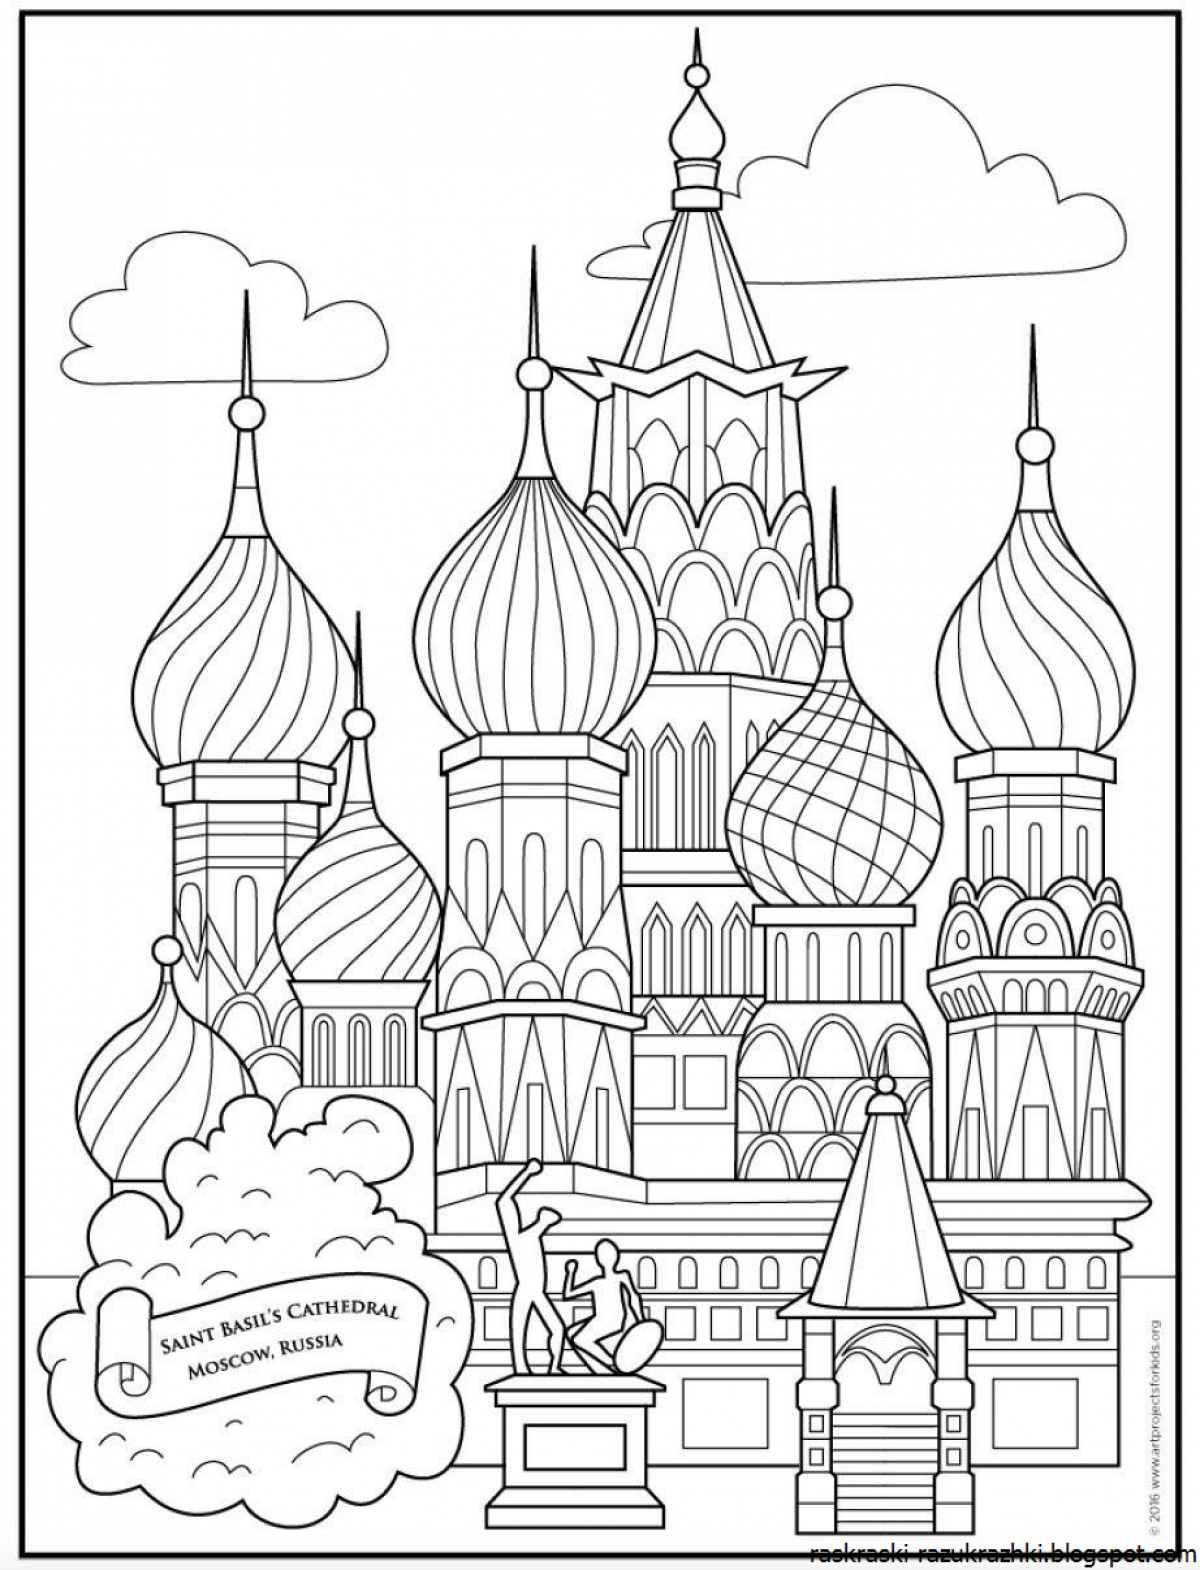 Moscow capital of russia for kids #6